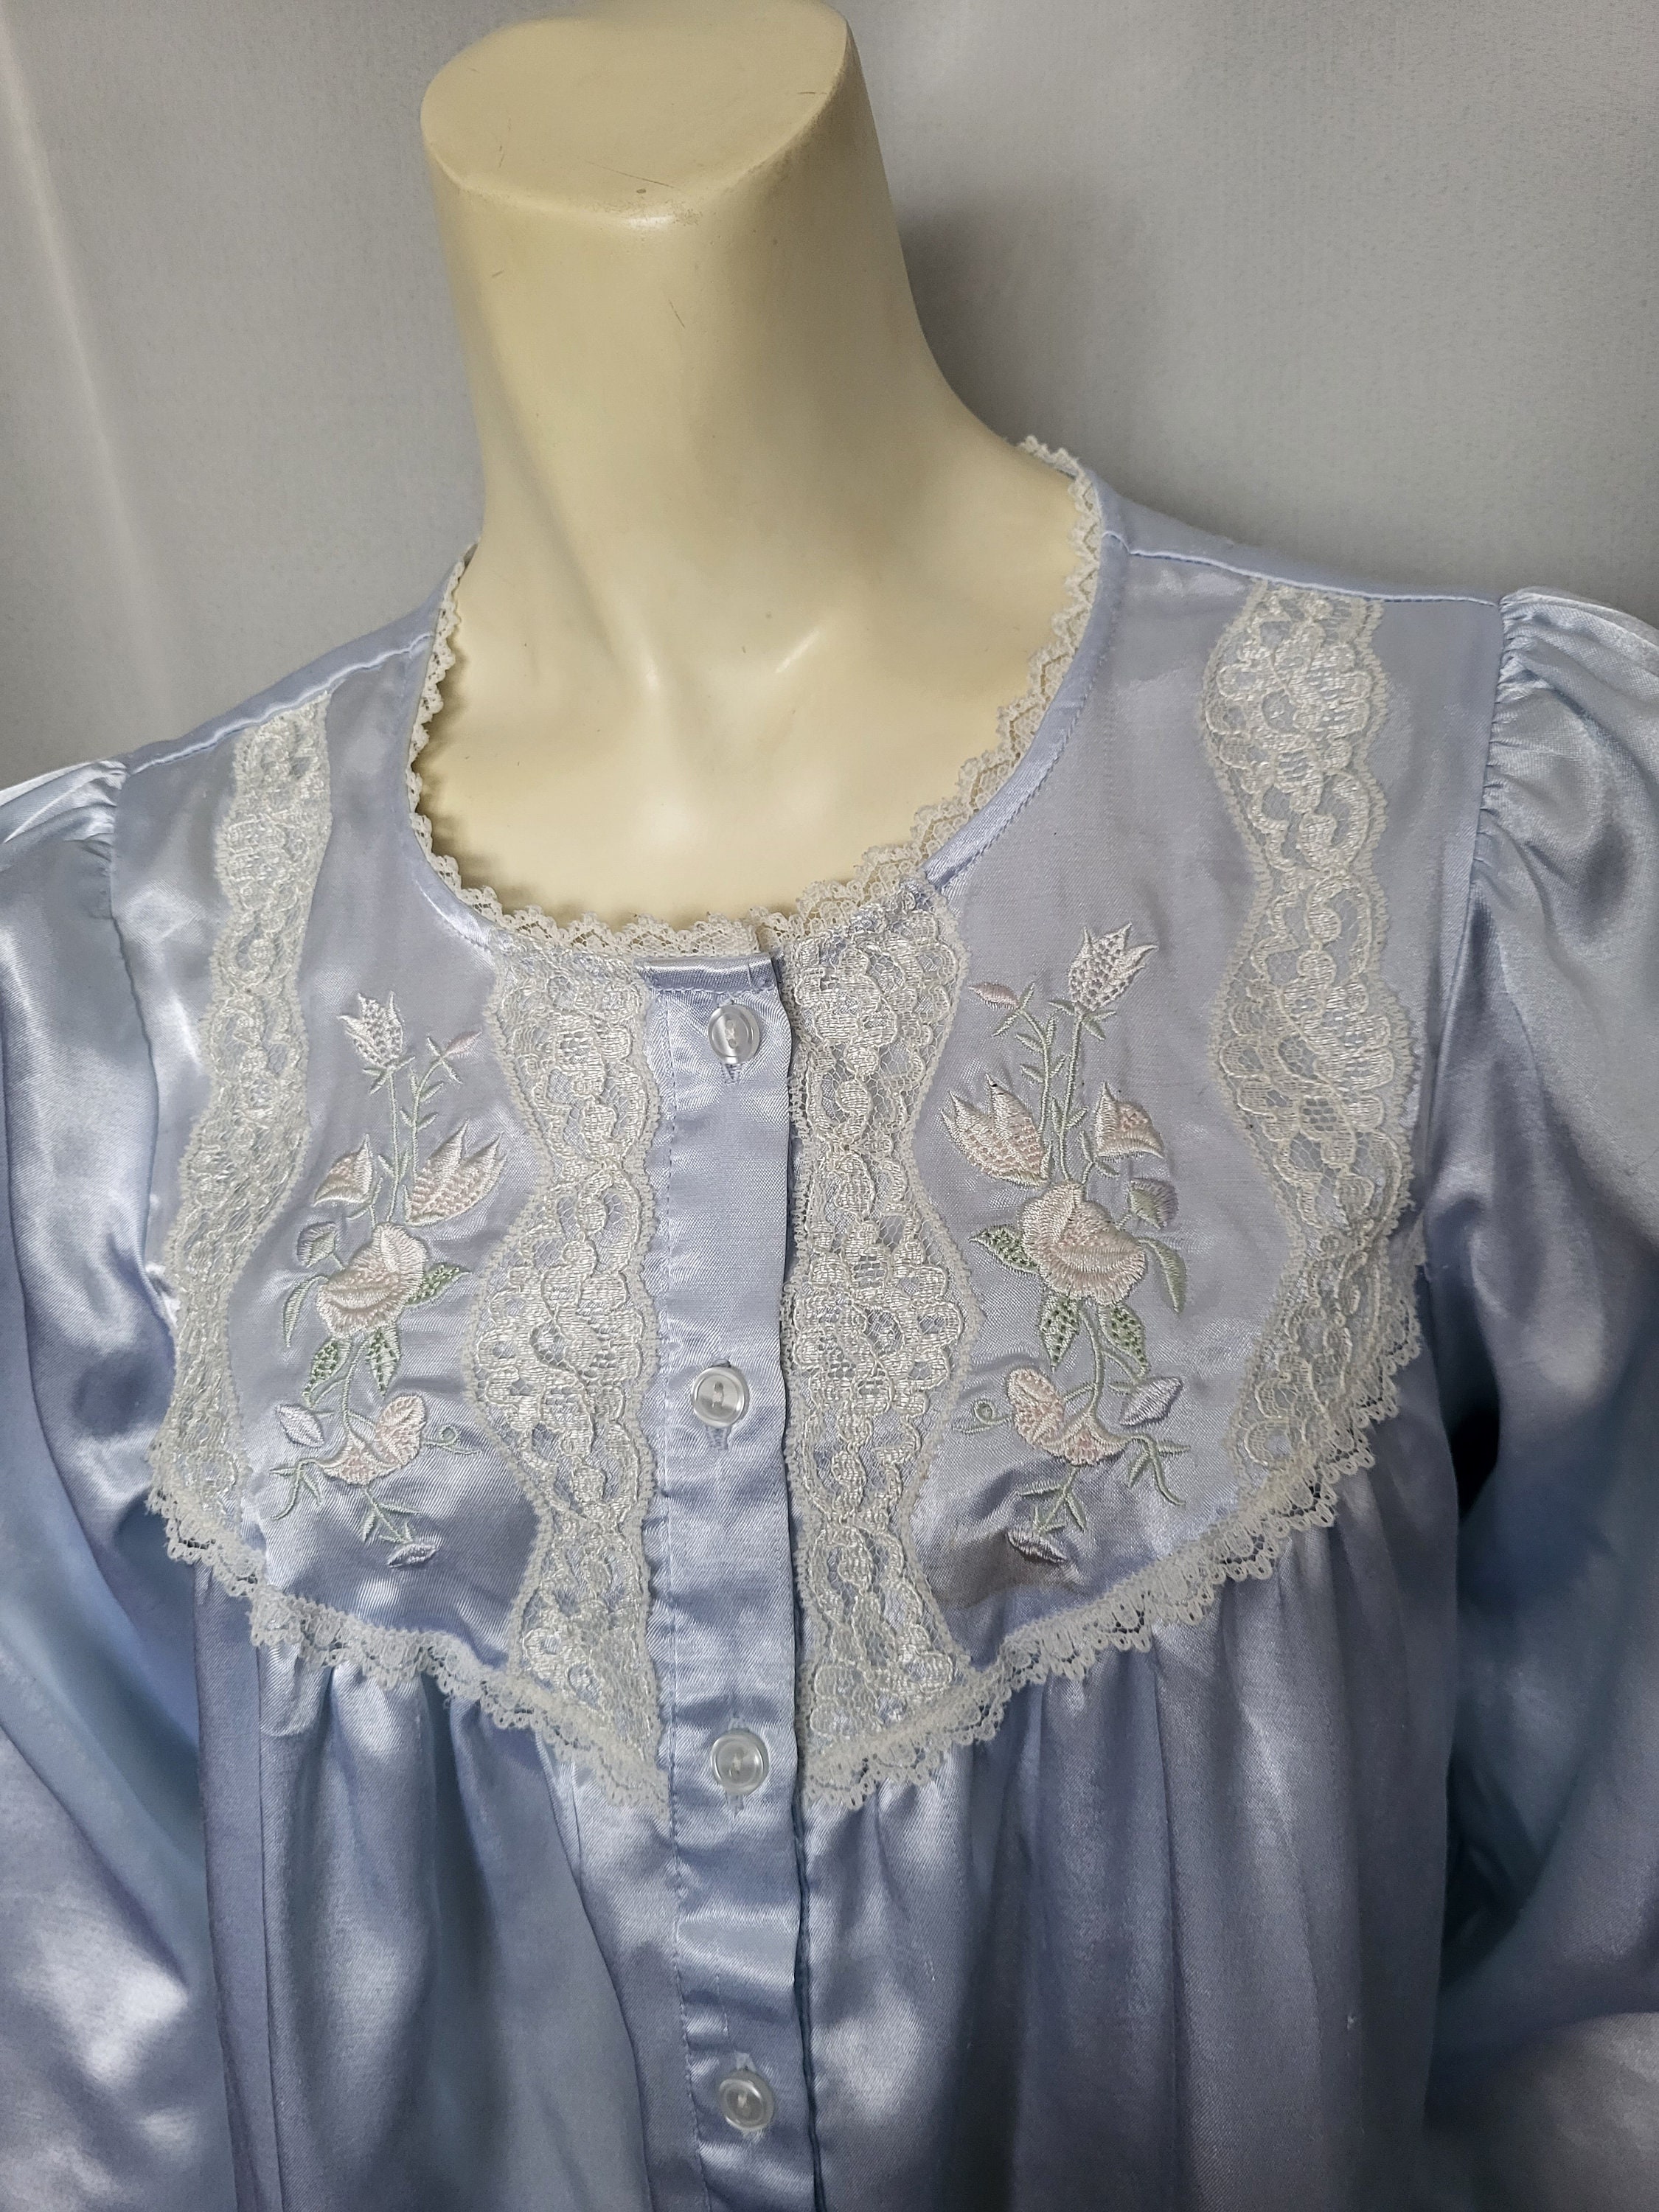 Pale Blue Satin Full Length Nightgown/embroidered Front Décor - Etsy